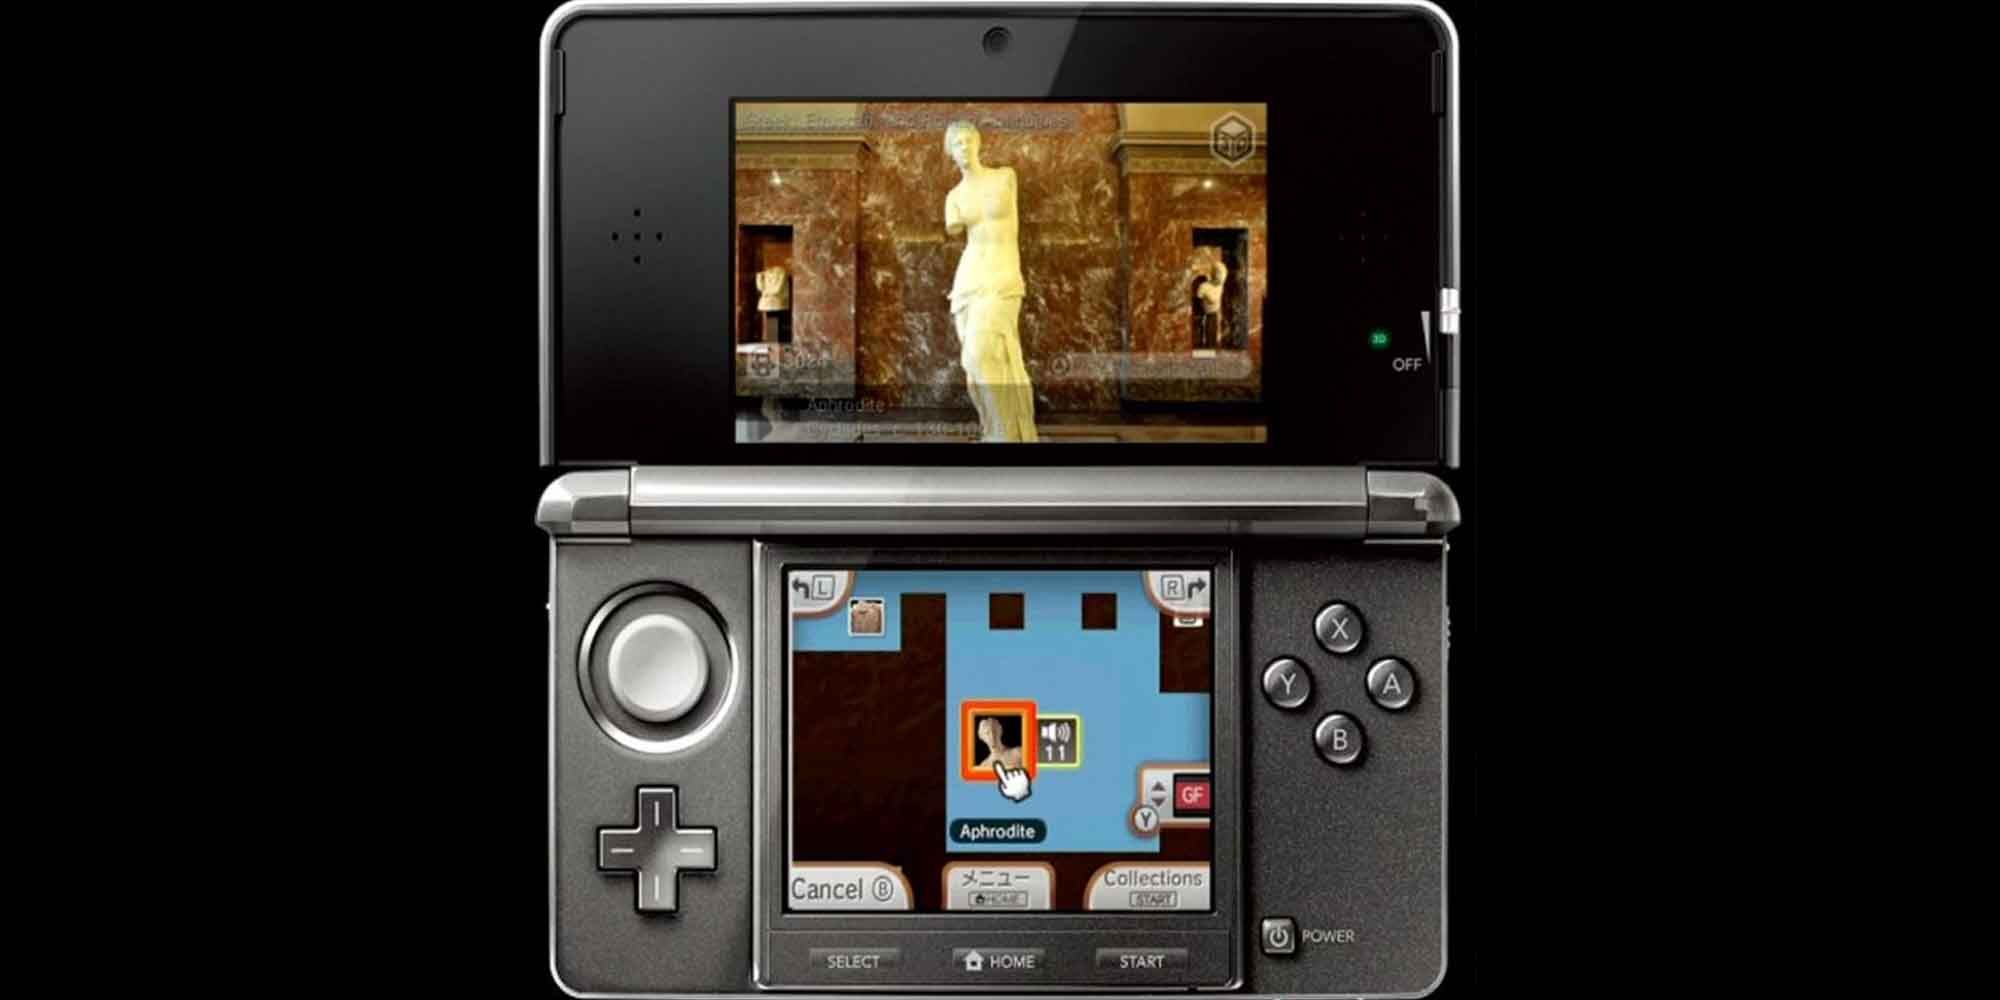 Guide Louvre for the Nintendo 3DS